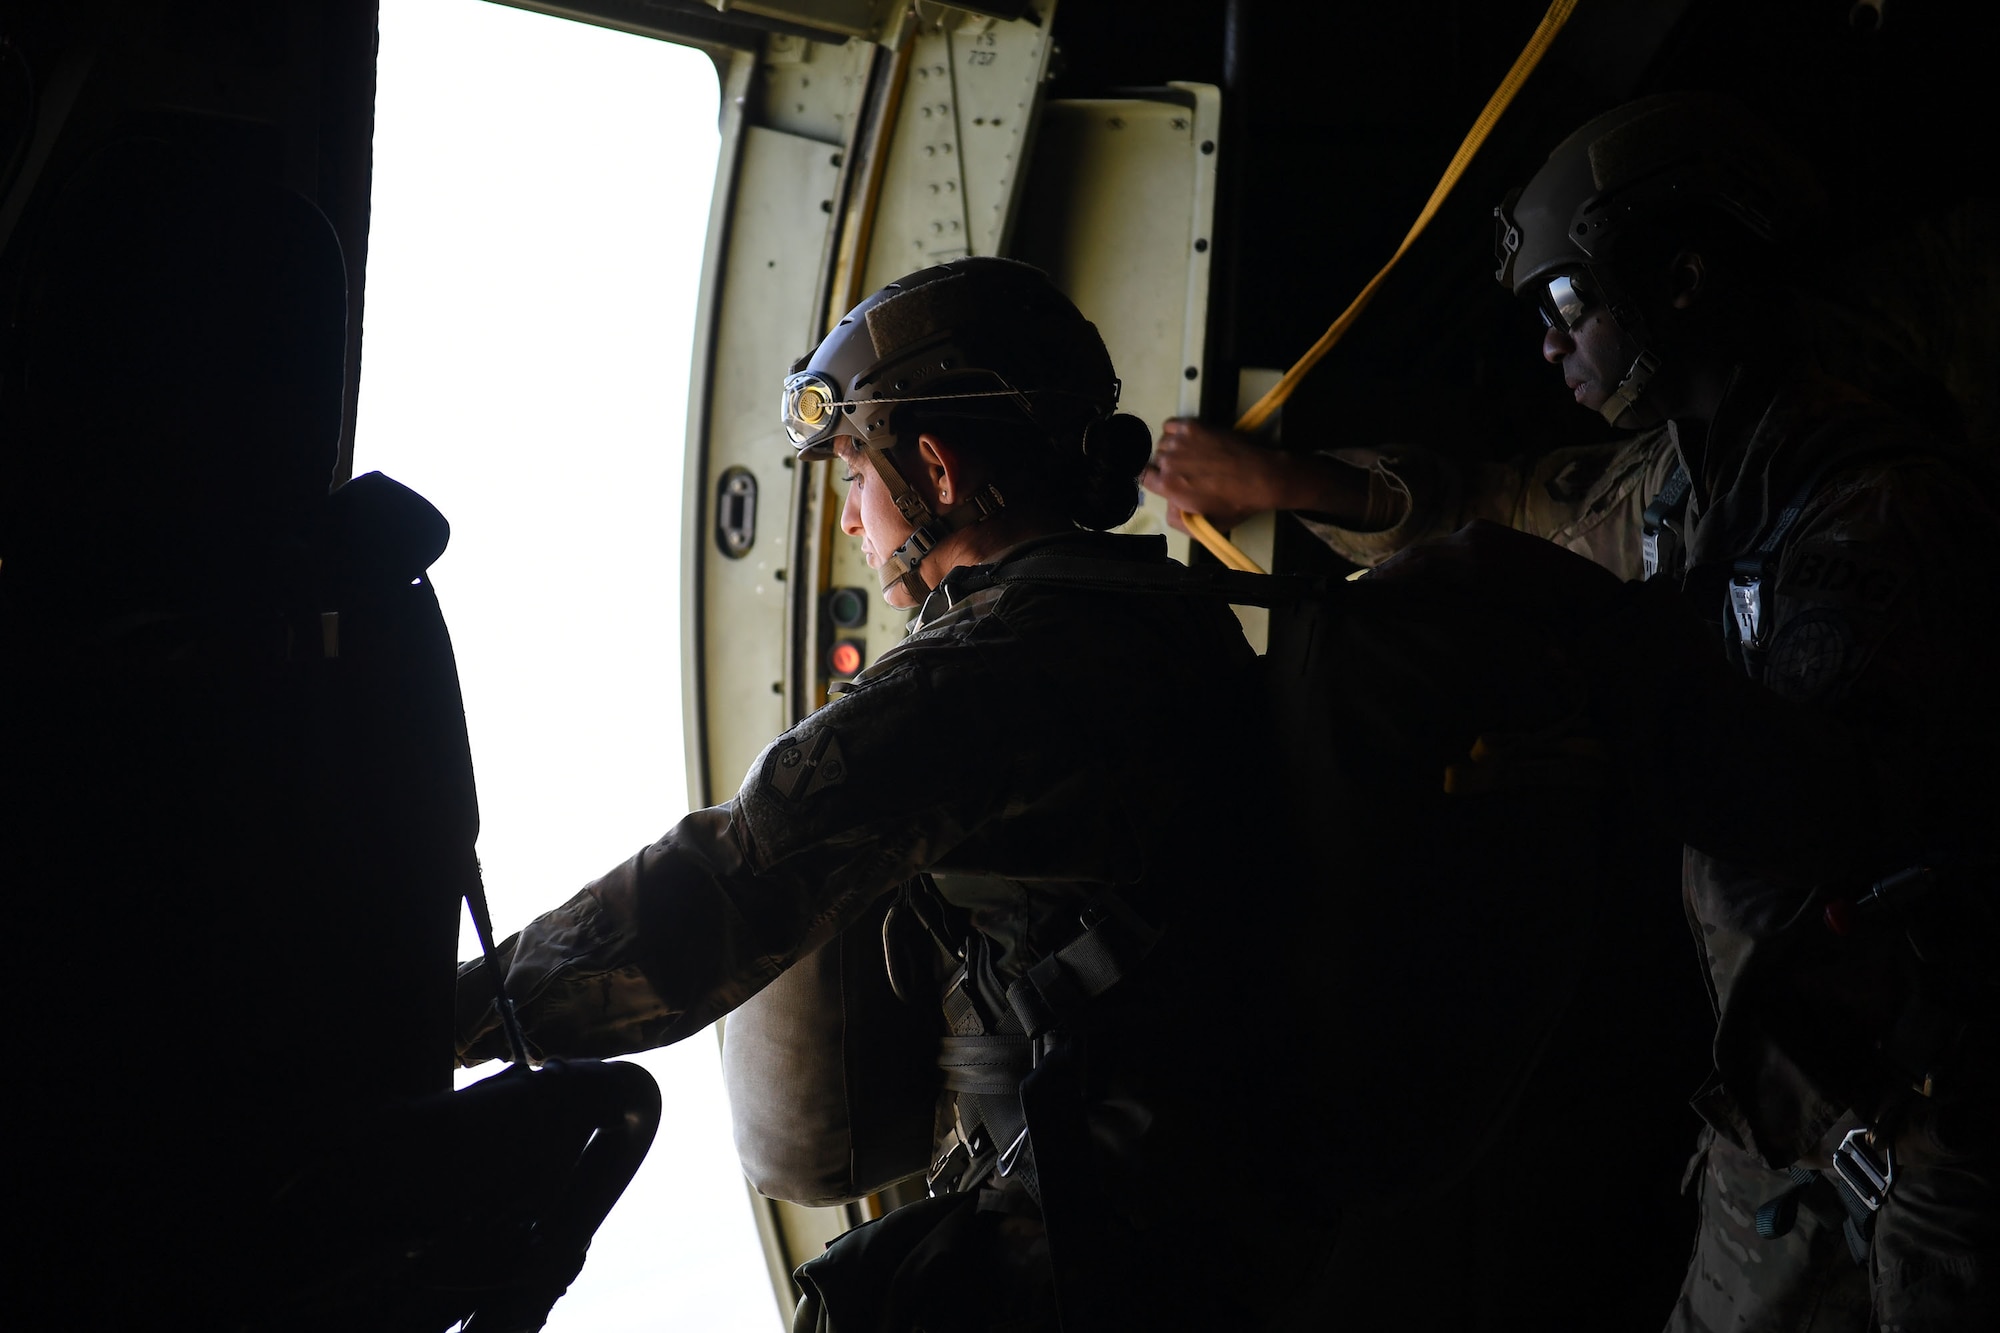 Tech. Sgt. Cassandra Nagy, 93d Air Ground Operations Wing jumpmaster, approaches the door of a HC-130J Combat King II near Moody Air Force Base, Ga. The overall objective of the training was to increase jumpers’ skills, knowledge and proficiency in regards to airborne operations. During a static-line jump, the jumper is attached to the aircraft via the ‘static-line’, which automatically deploys the jumpers’ parachute after they’ve exited the aircraft. (U.S. Air Force photo by 1st Lt. Faith Brodkorb)